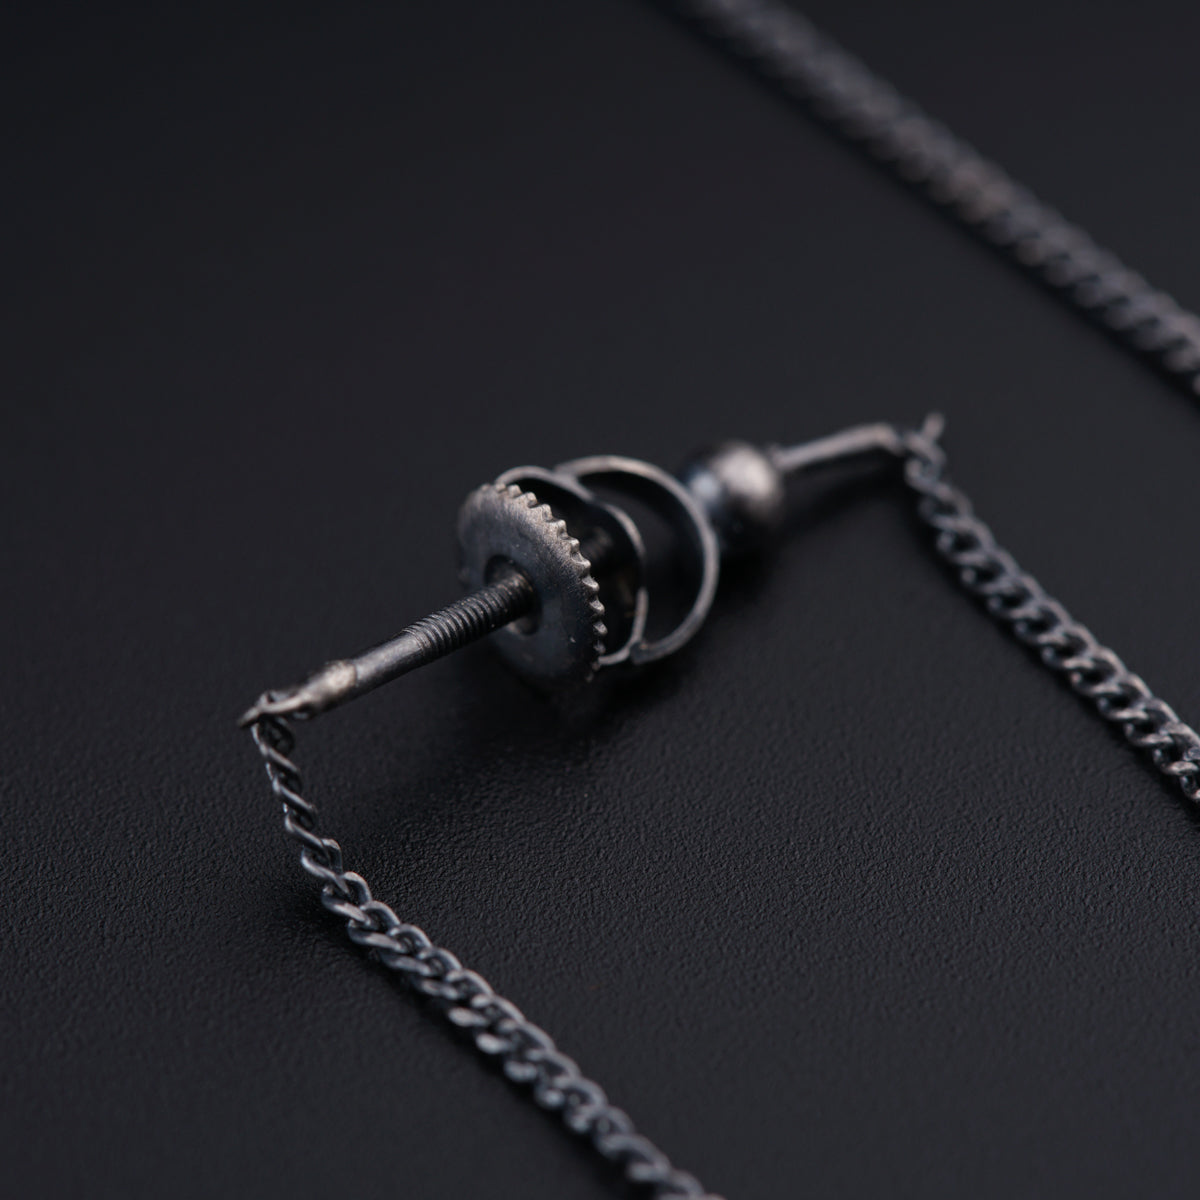 a pair of screws and a chain on a black surface